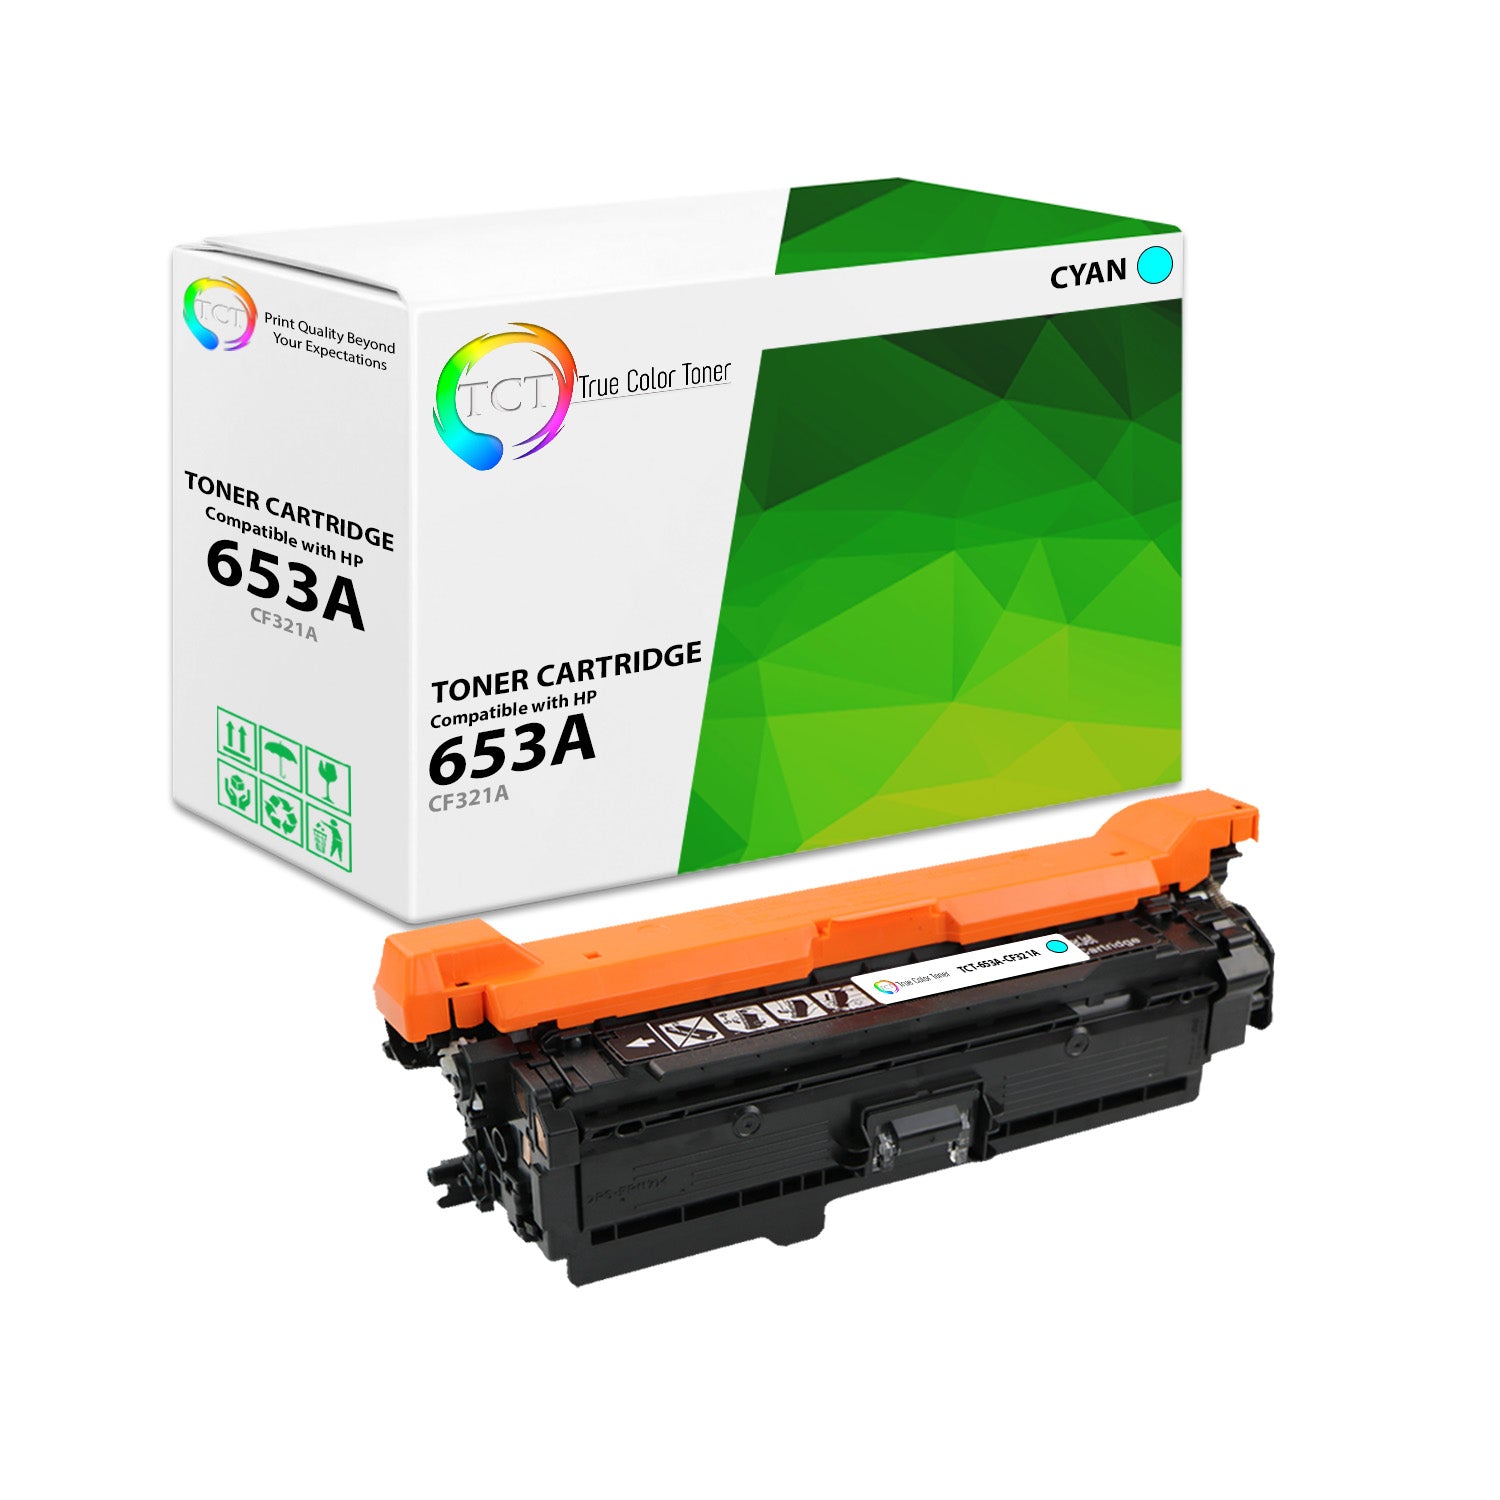 TCT Compatible Toner Cartridge Replacement for the HP 653A Series - 1 Pack Cyan